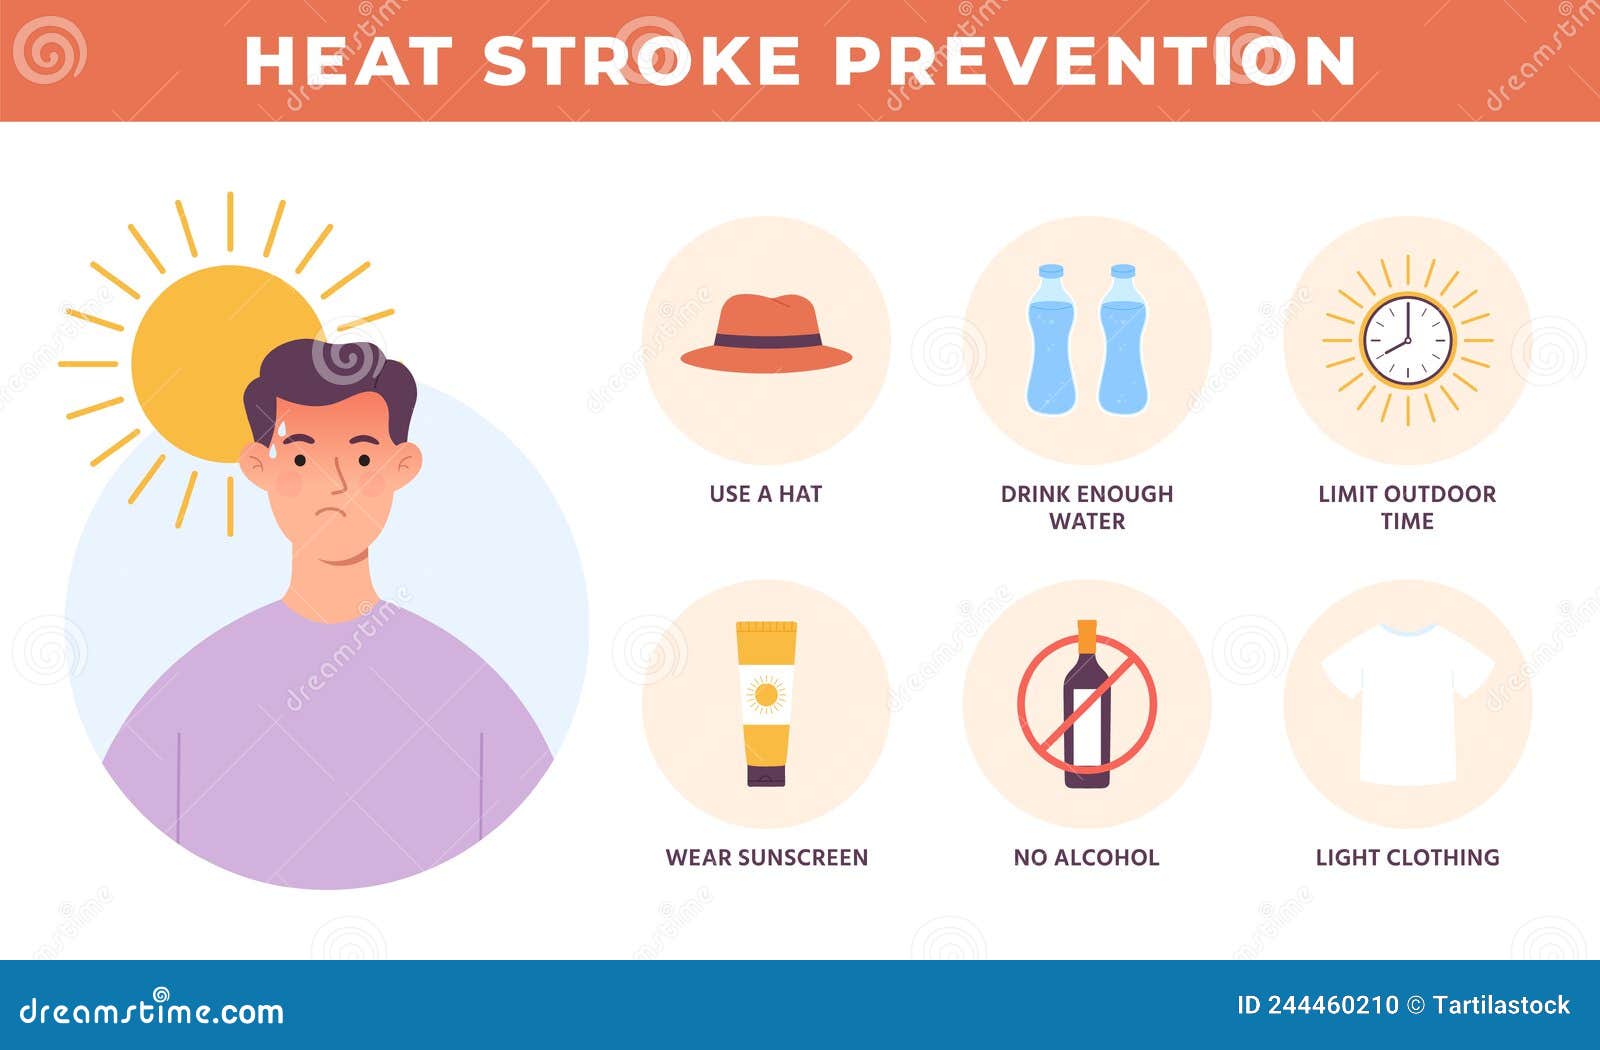 Heat Stroke Prevention Poster, Hot Summer Safety. Health Care Protection  from Sunstroke and Overheating Stock Vector - Illustration of safety,  drink: 244460210